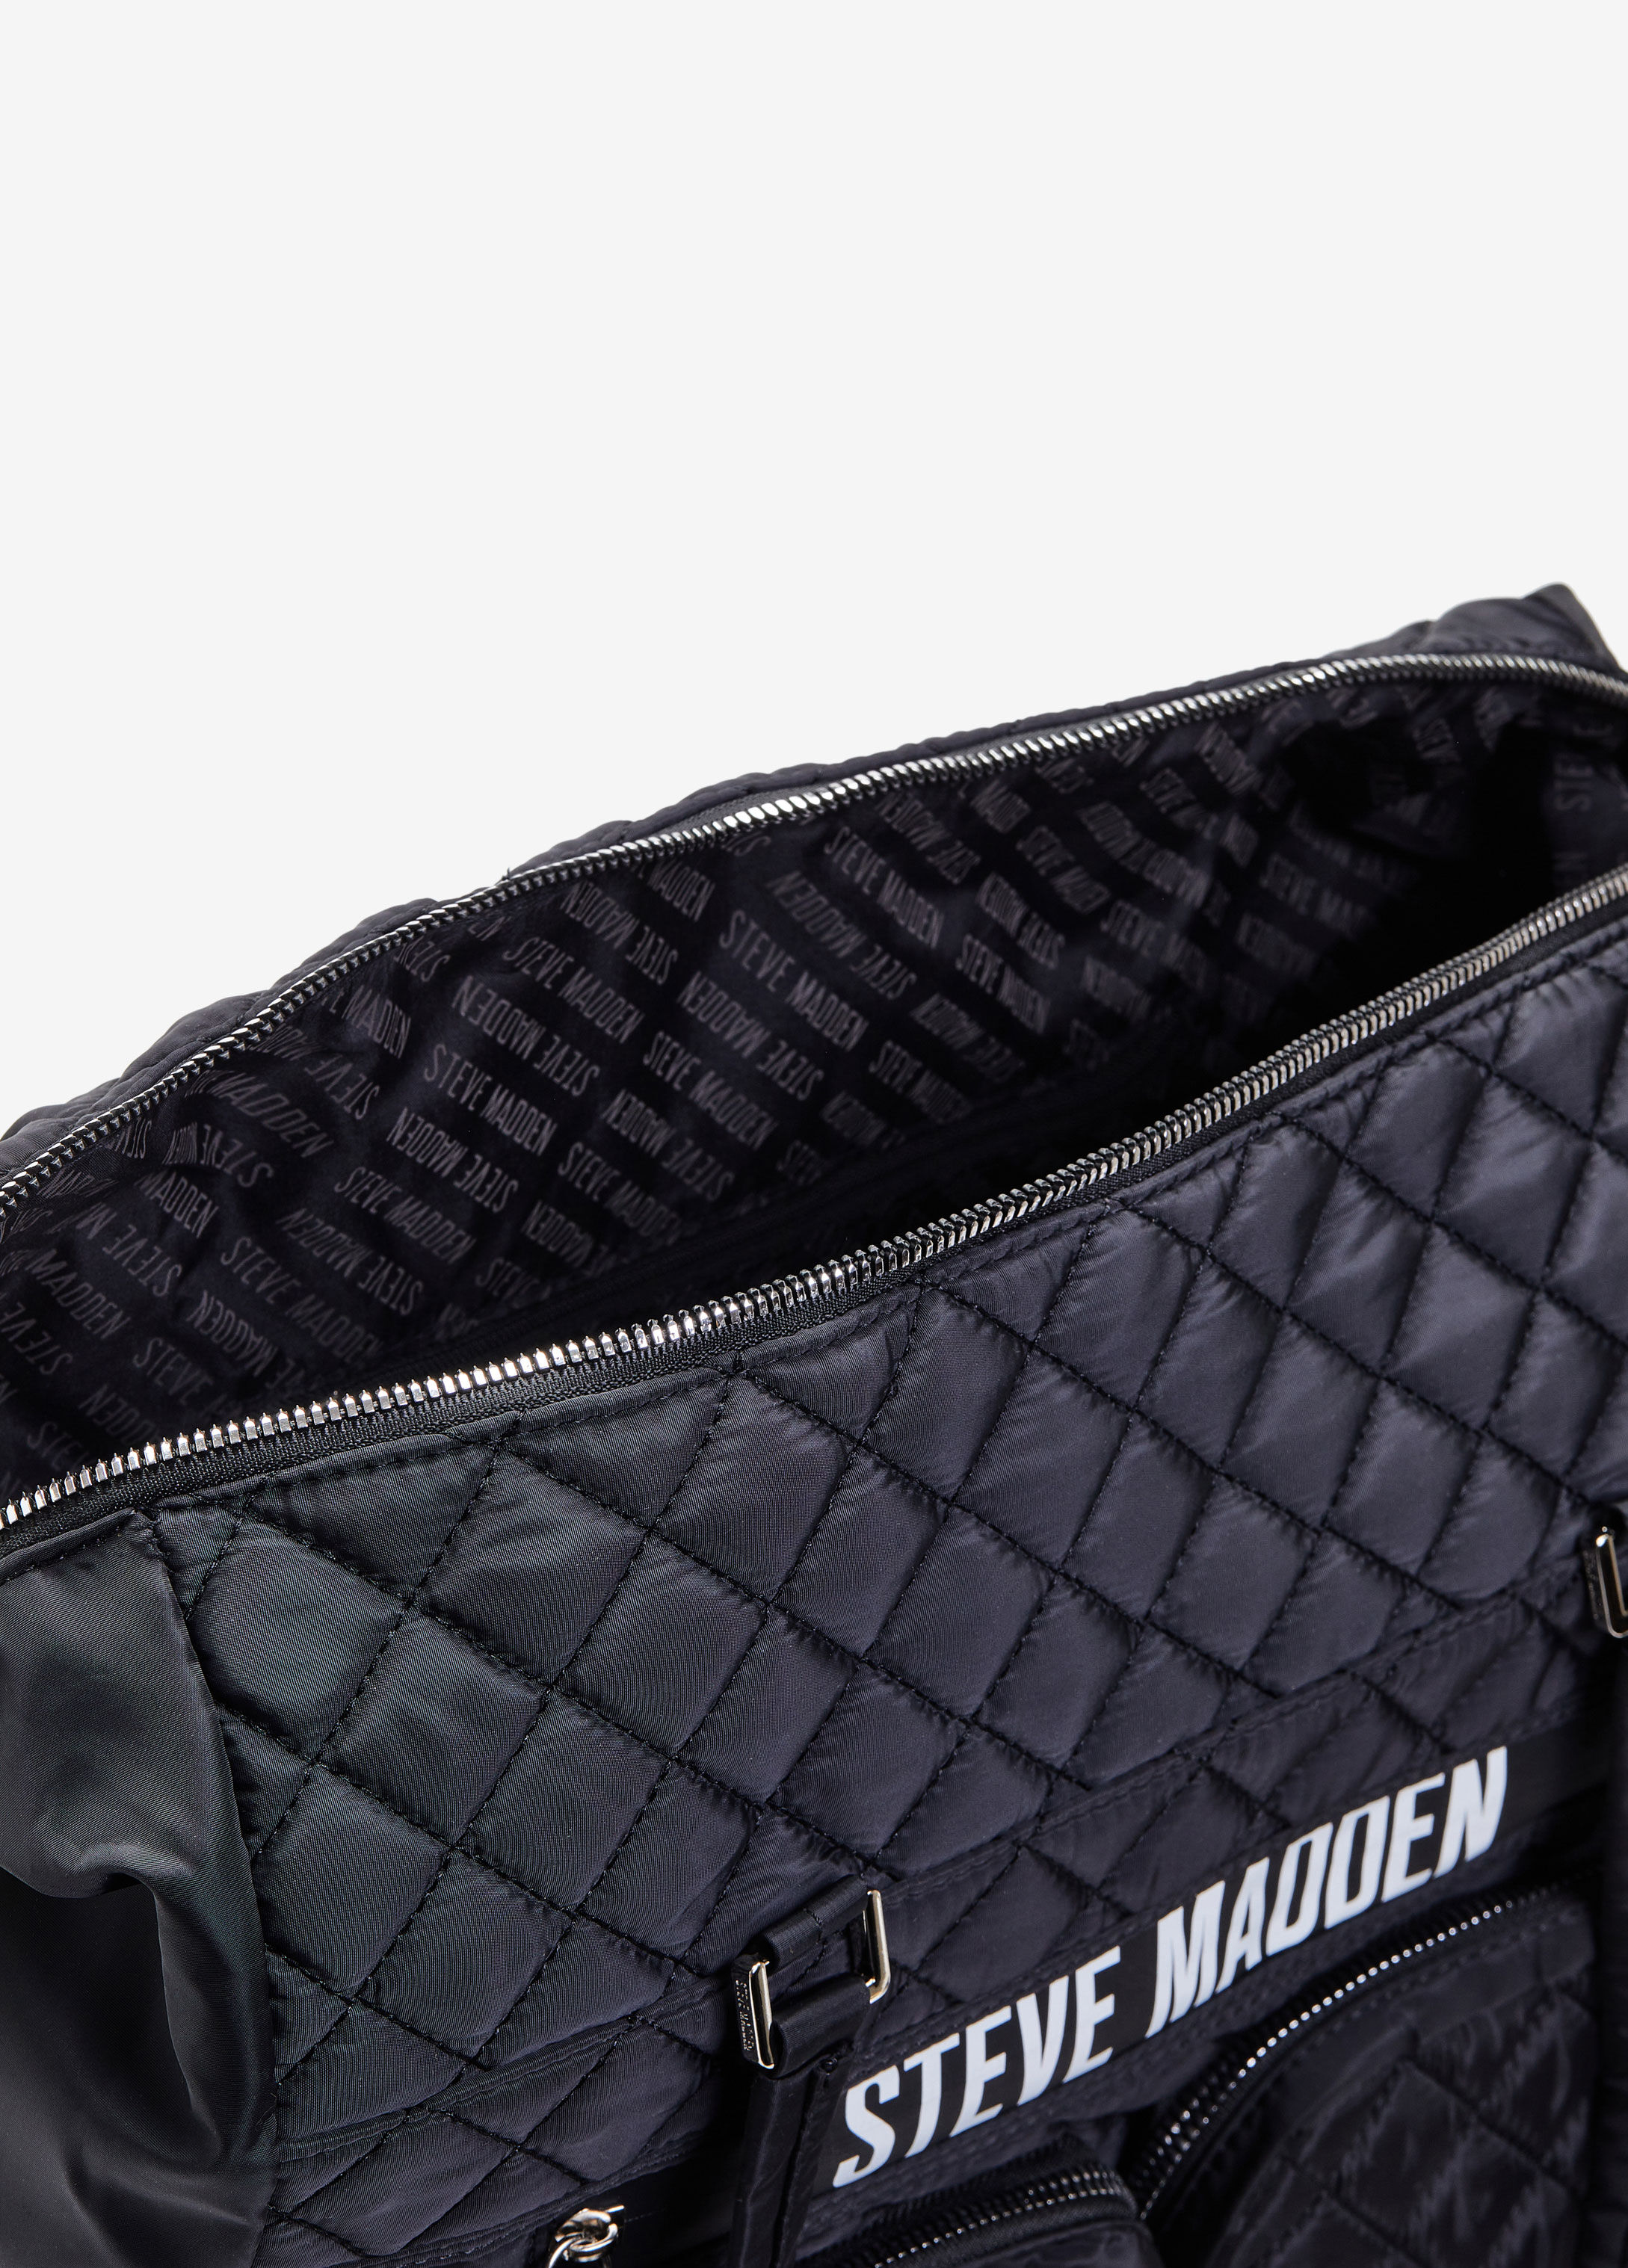 Trendy Steve Madden BNicky Quilted Tote Bag Chic Overnight Bag